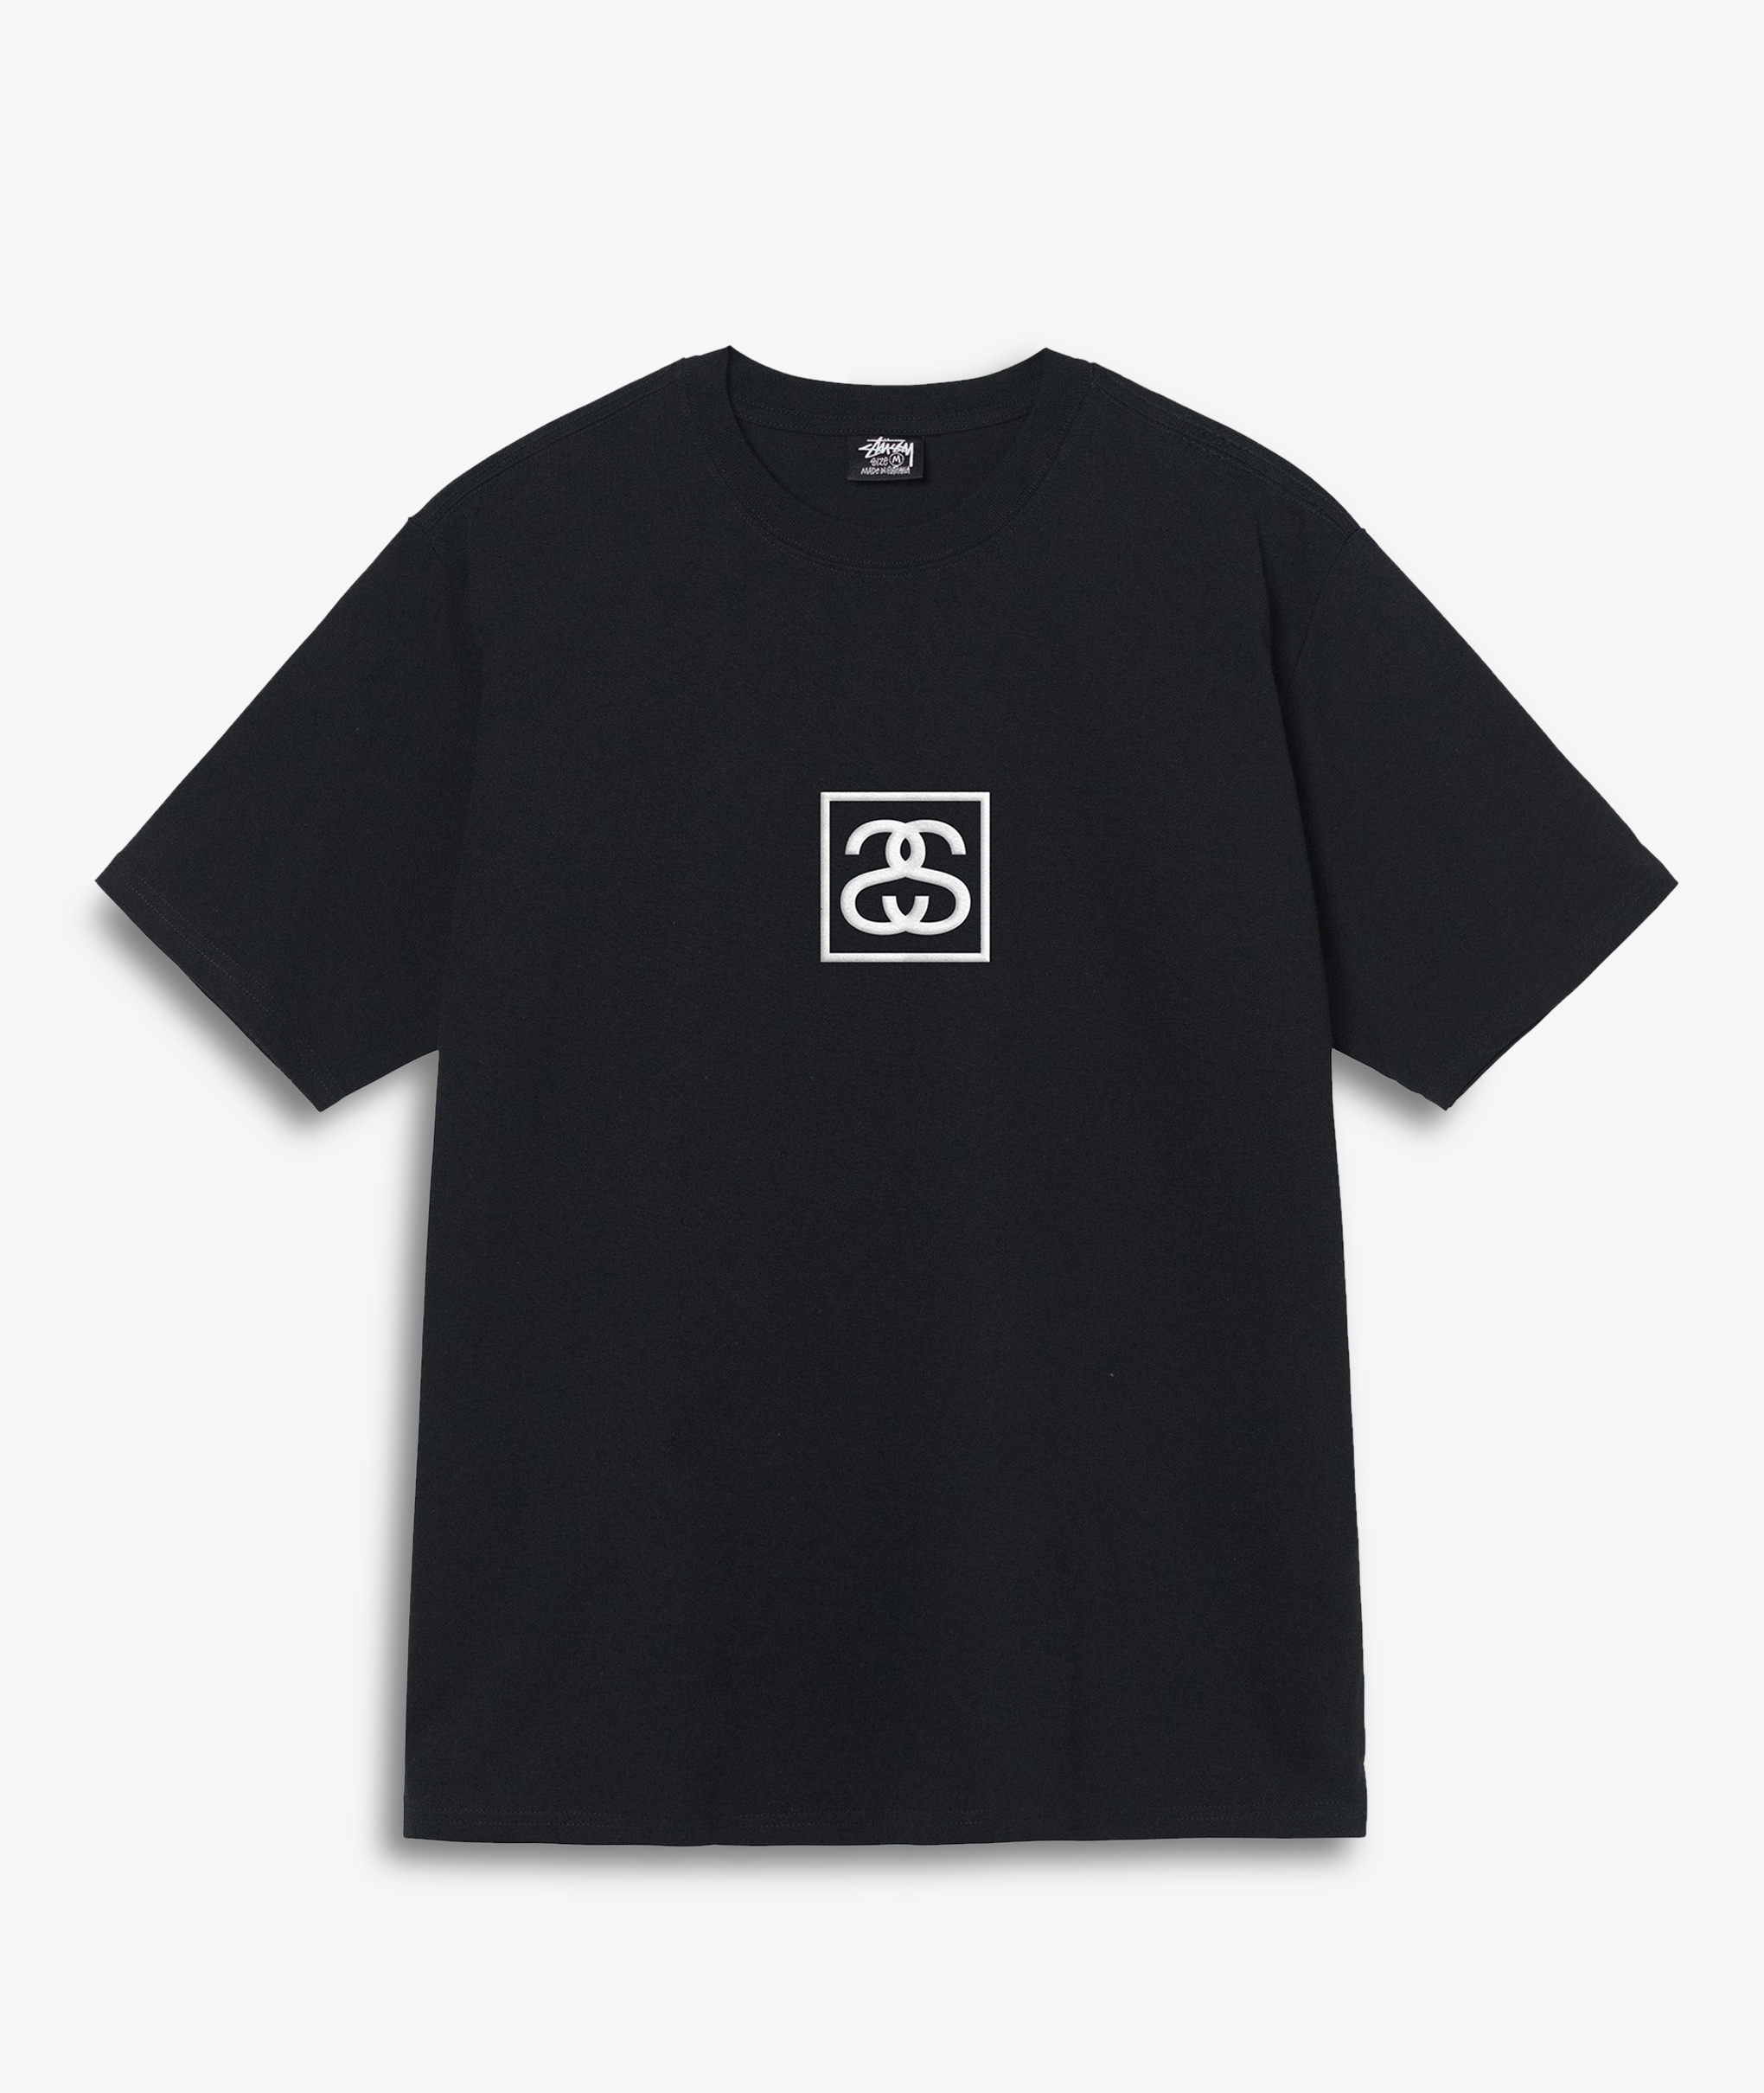 Norse Store | Shipping Worldwide - Stüssy Squared Tee - Black